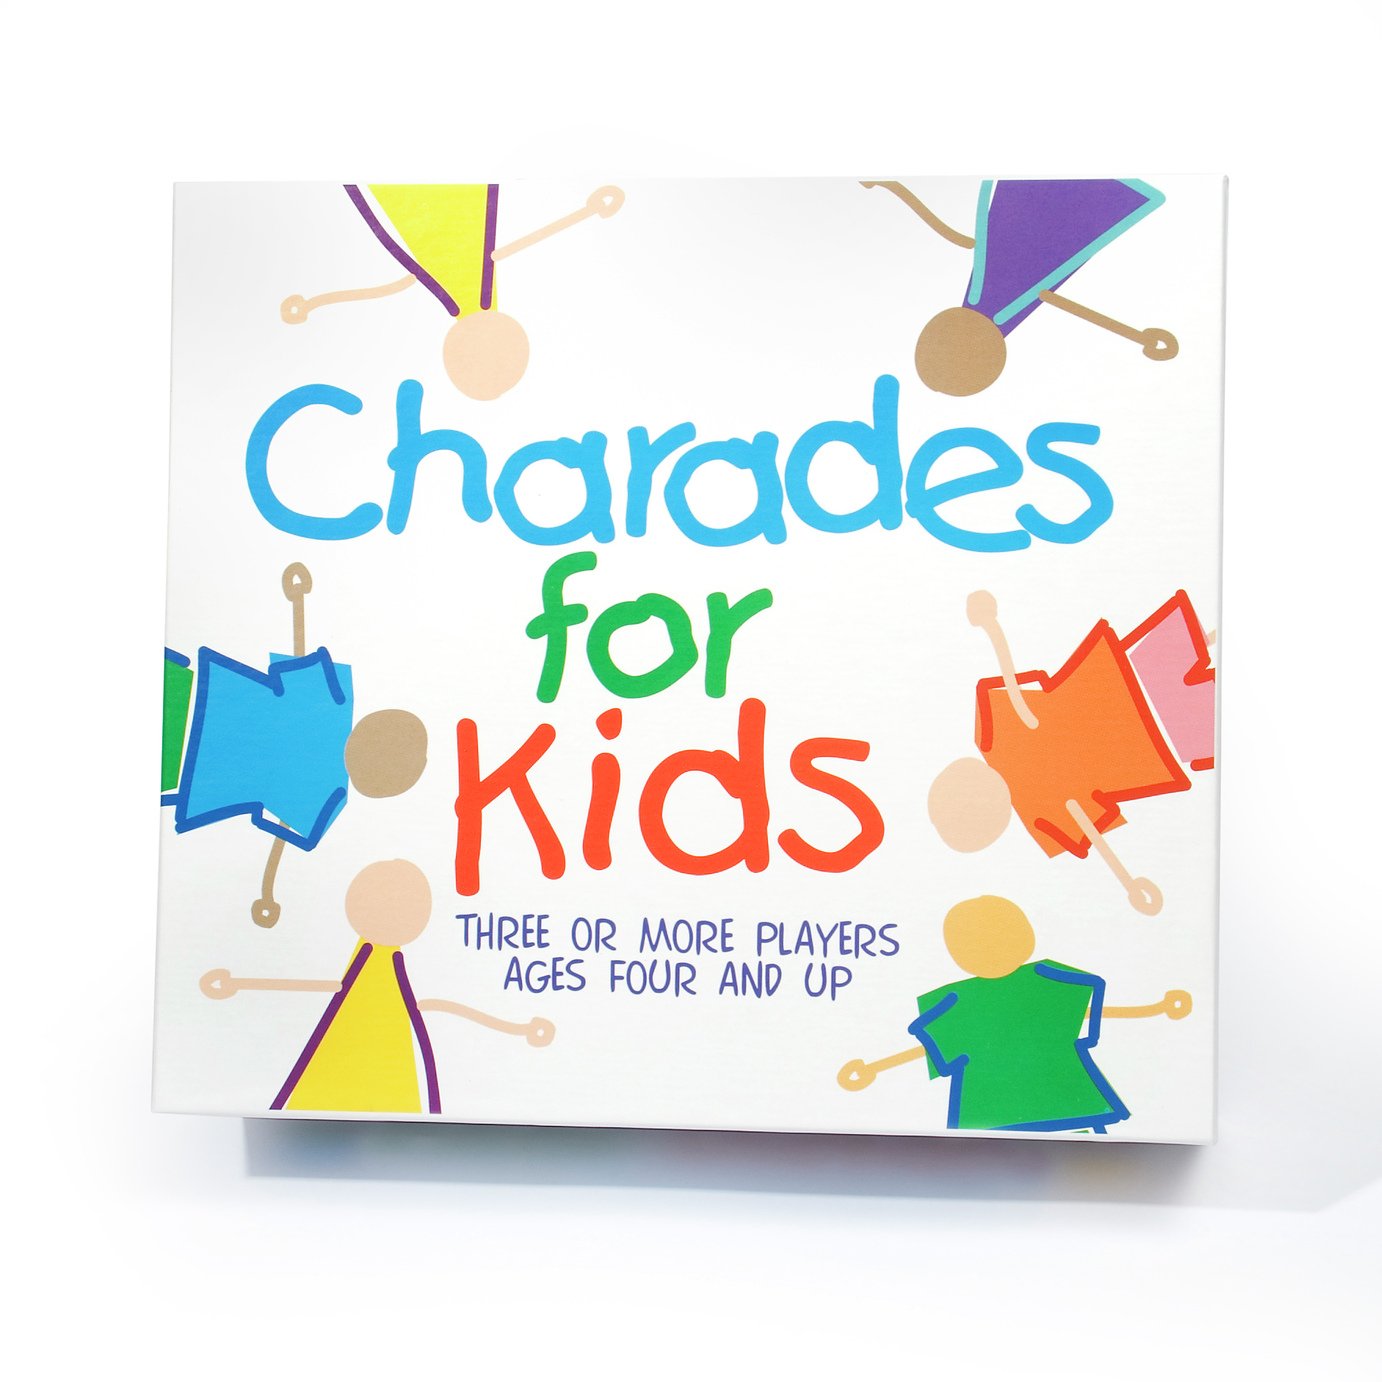 Charades for Kids Game Review